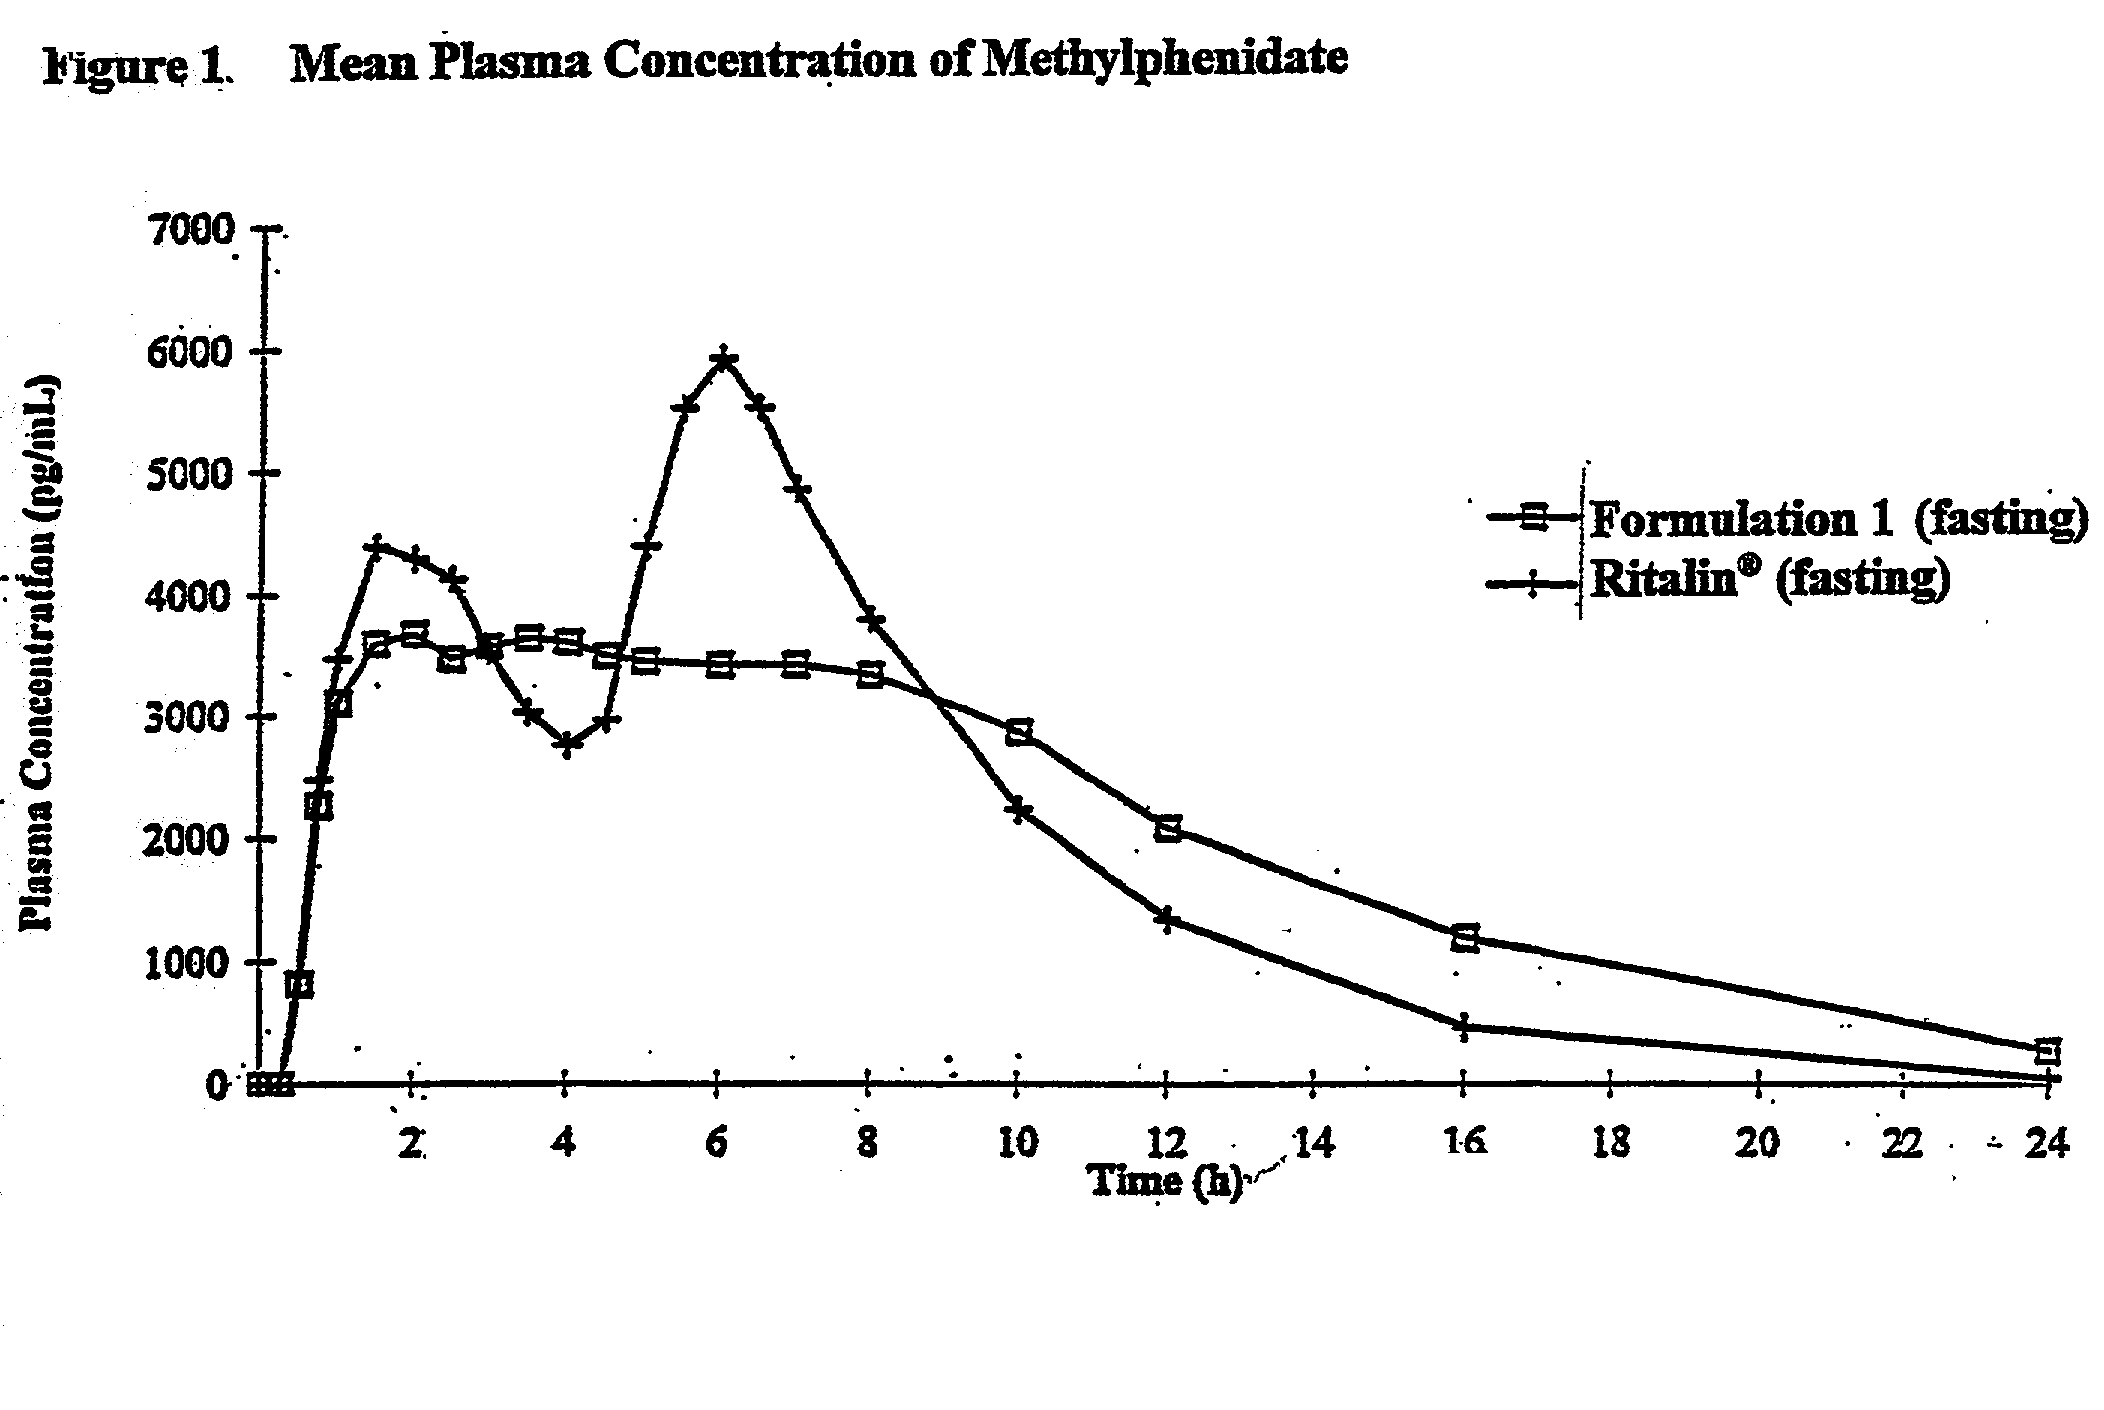 Controlled release formulations having rapid onset and rapid decline of effective plasma drug concentrations